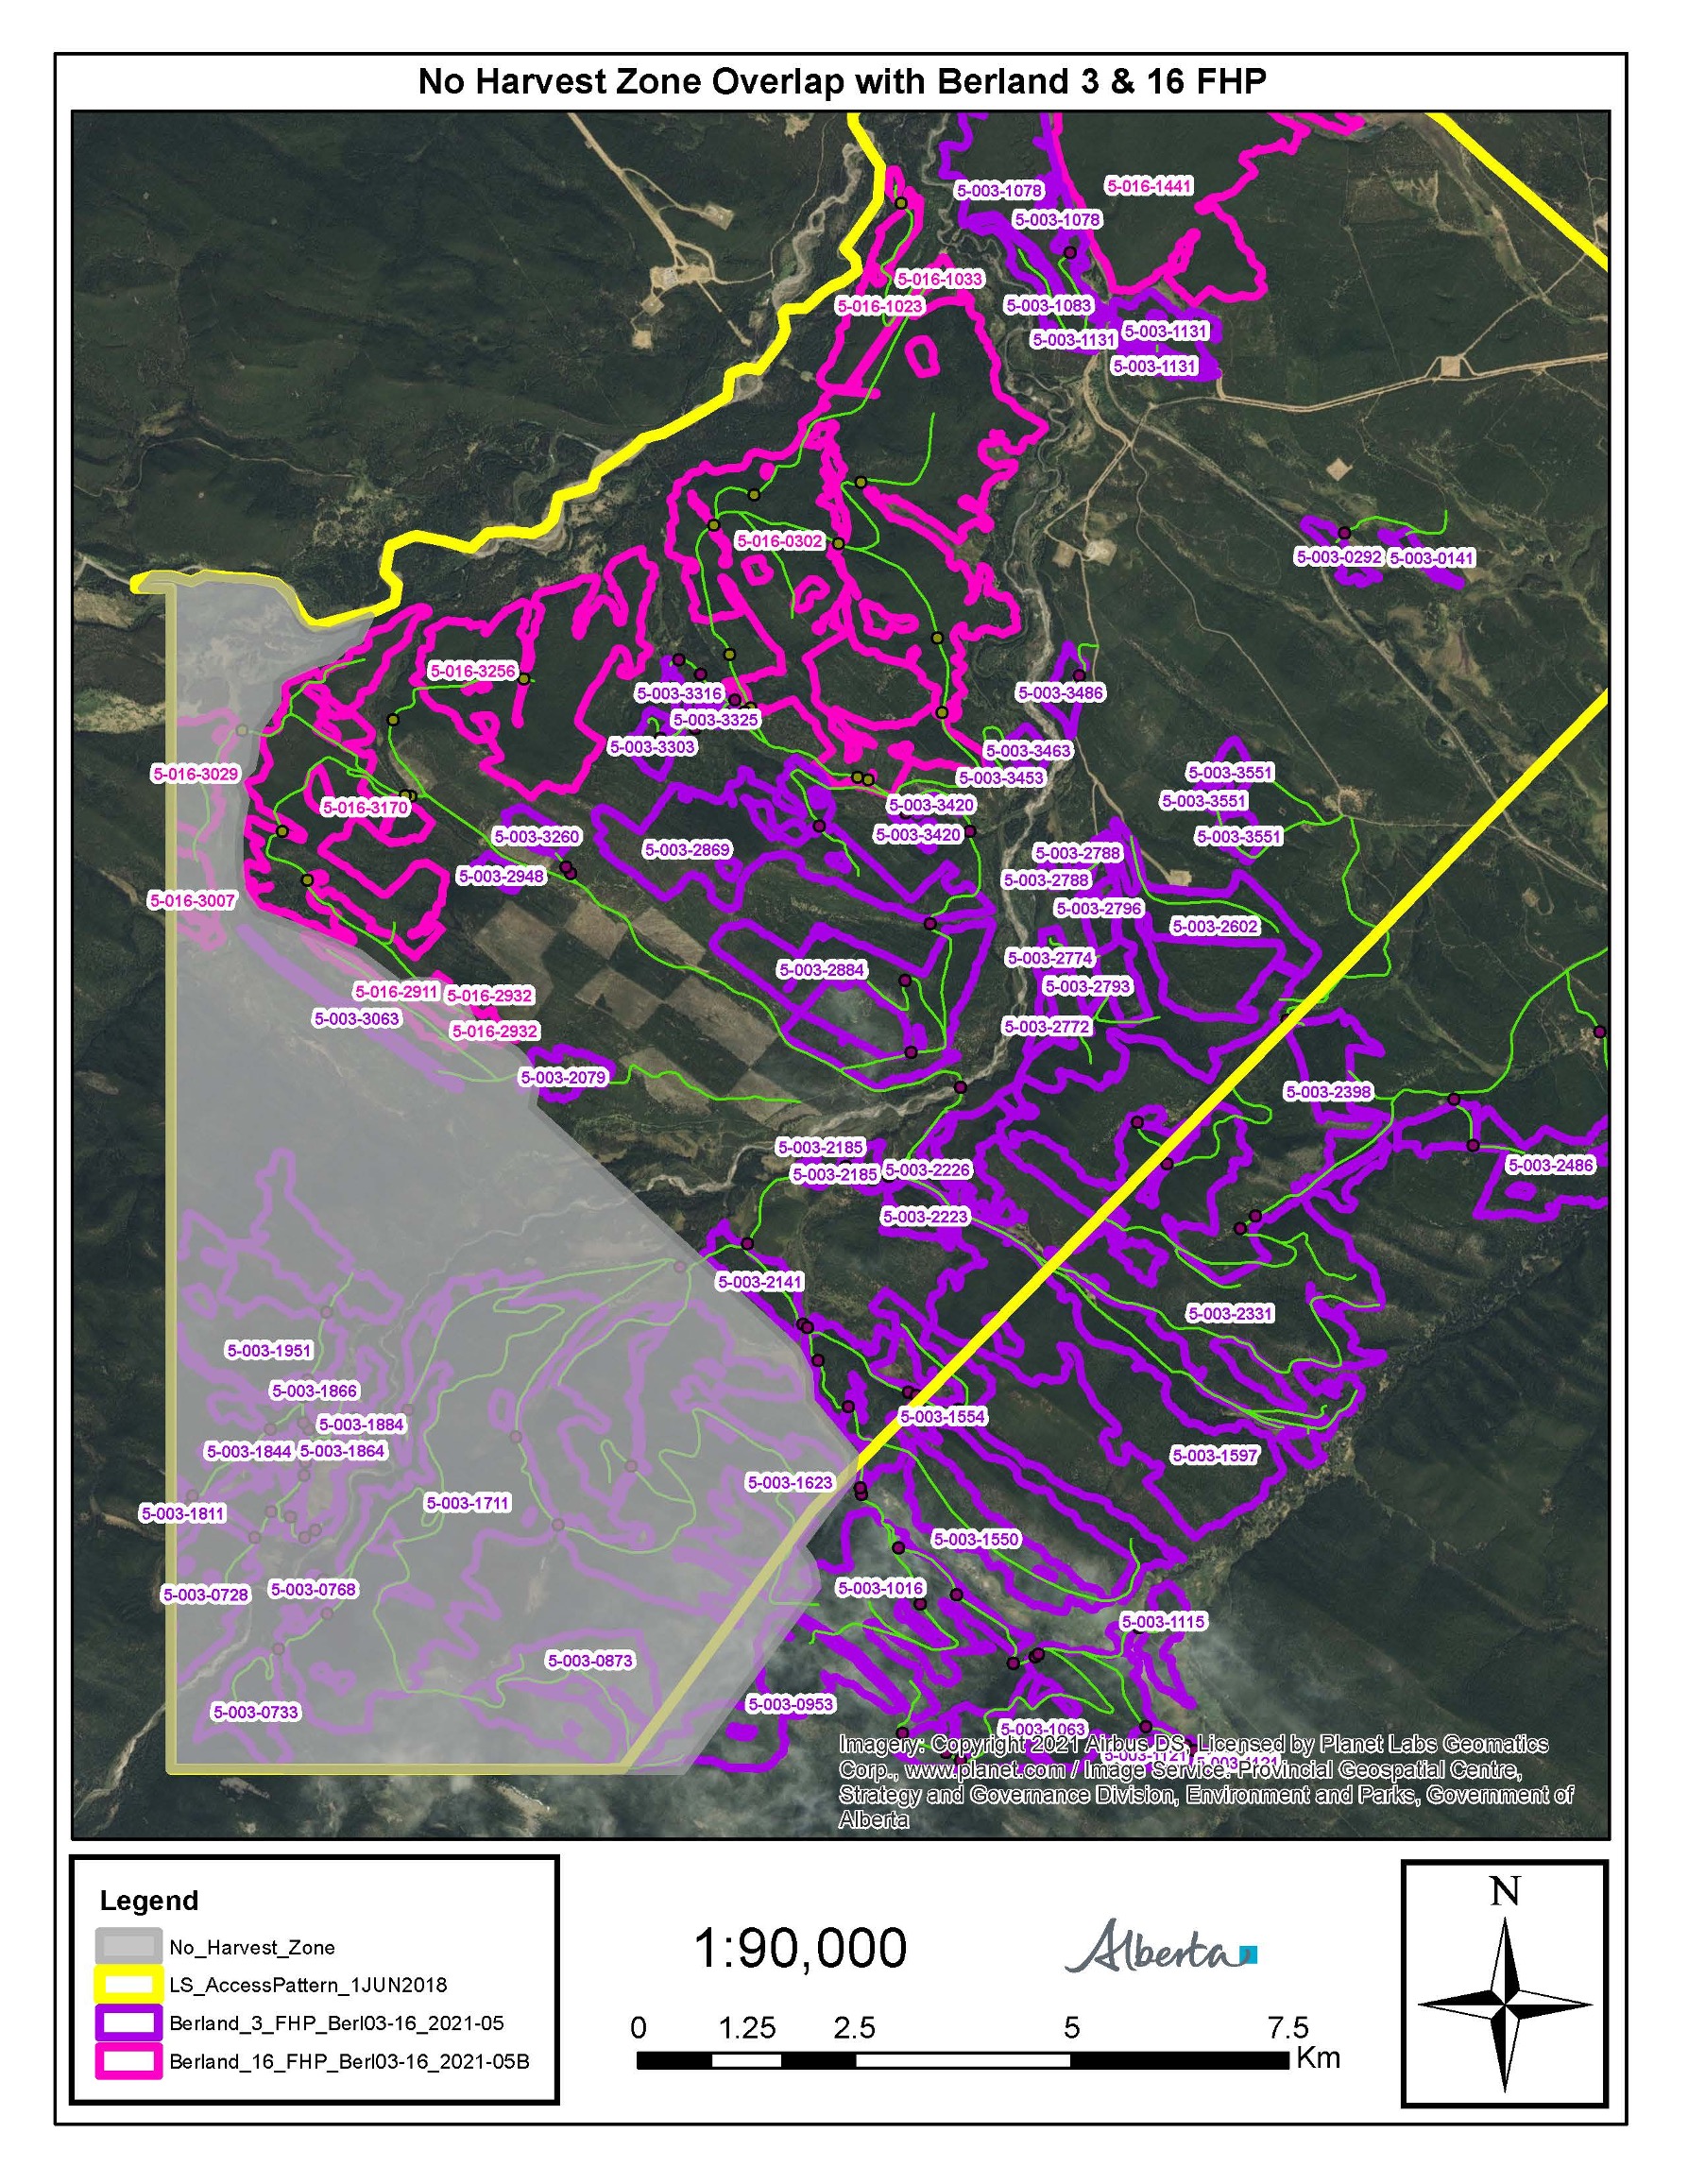 Map 2: Temporary ‘No Harvest Zone’ (shaded gray) in Moon Creek Area of West Fraser Hinton Forestry Tenure. Map Source: Government of Alberta, November 2021.